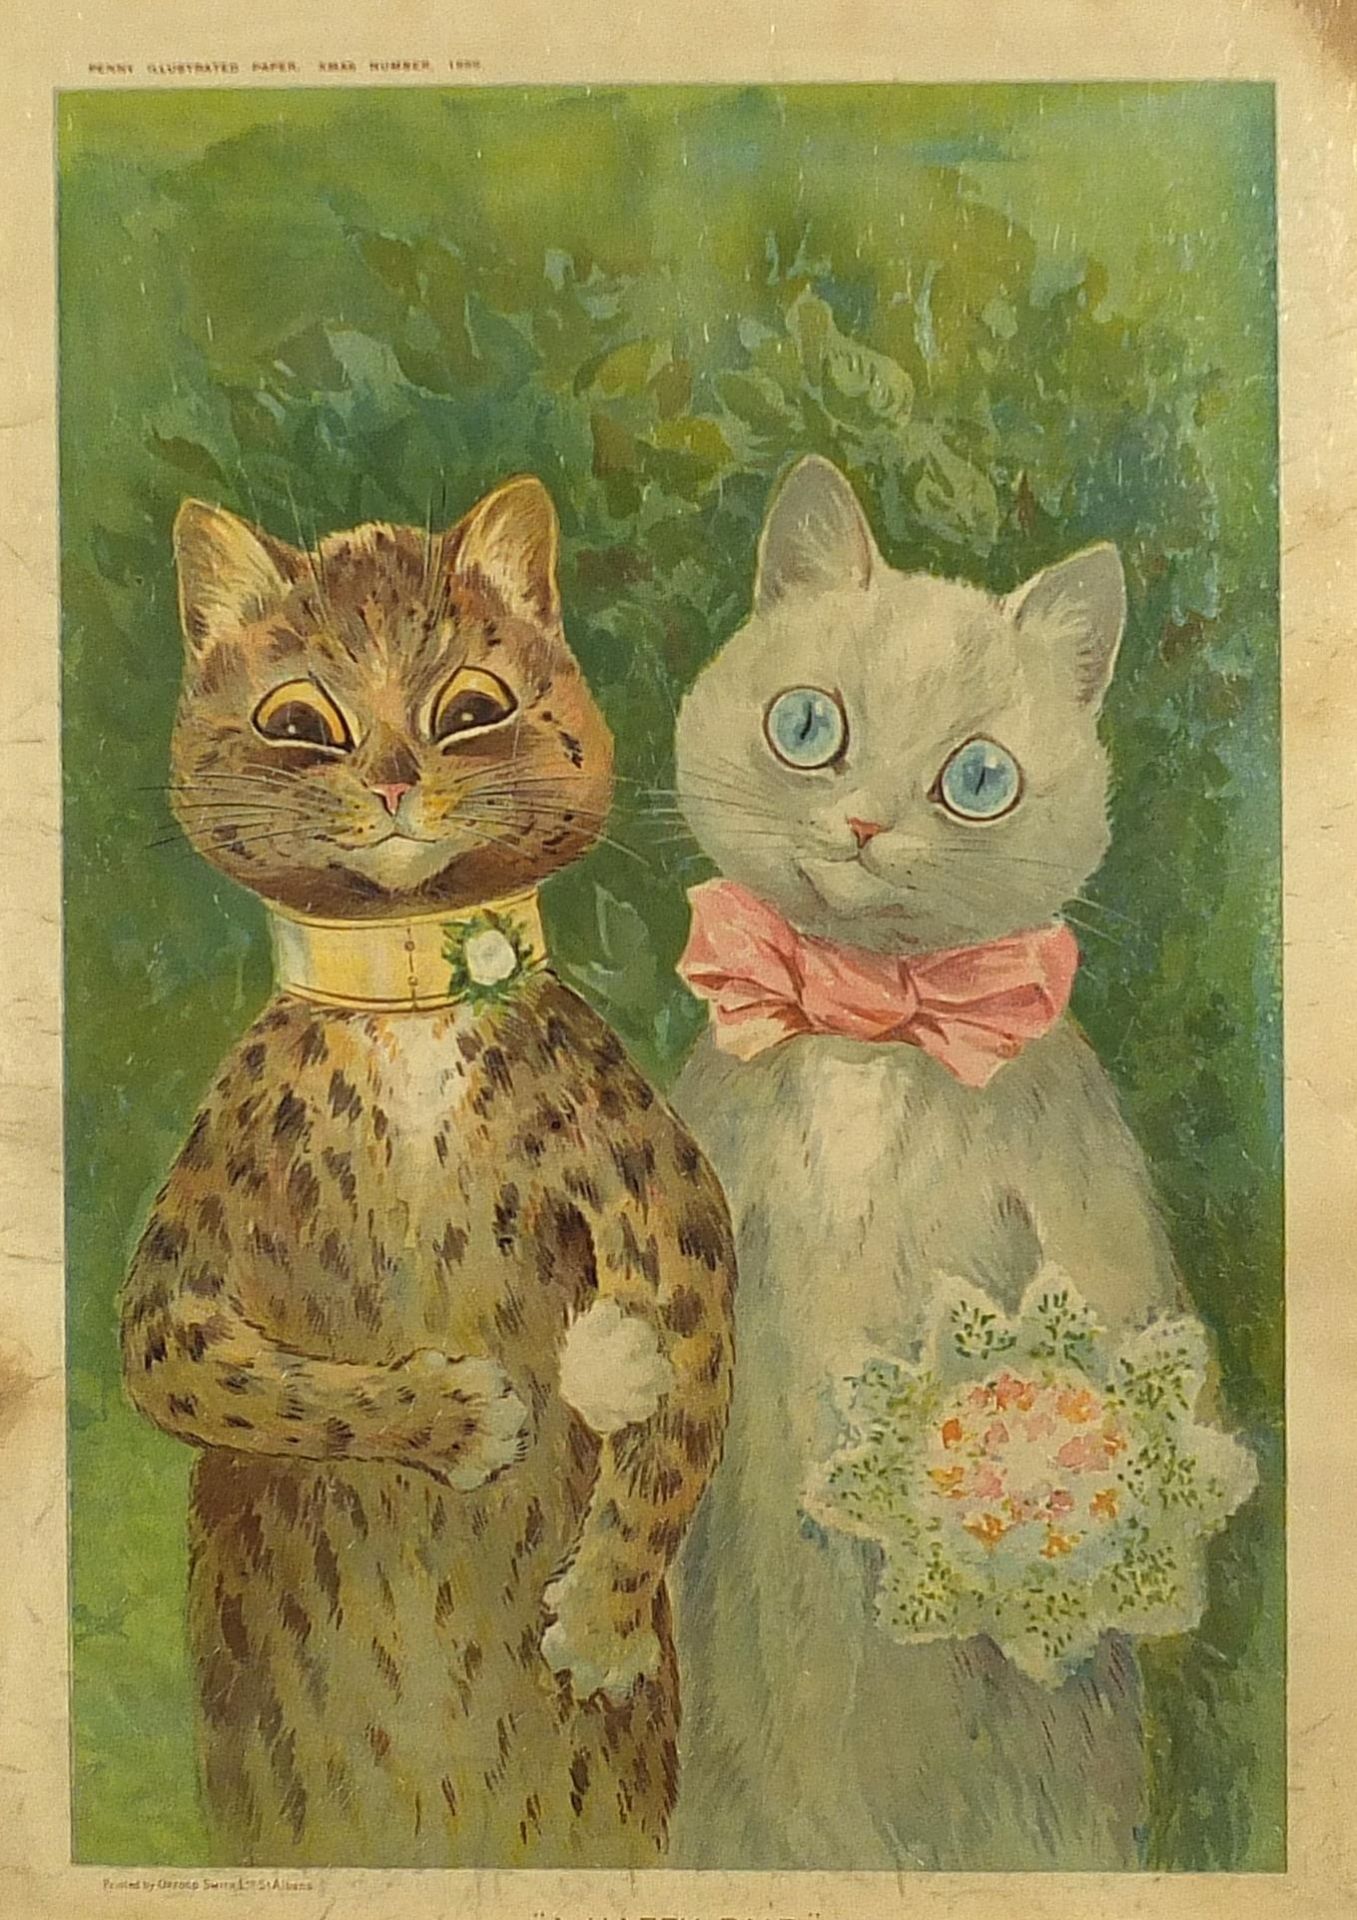 After Louis Wain - A Happy Pair, vintage print in colour, printed by Orford Smith, St Albans, housed